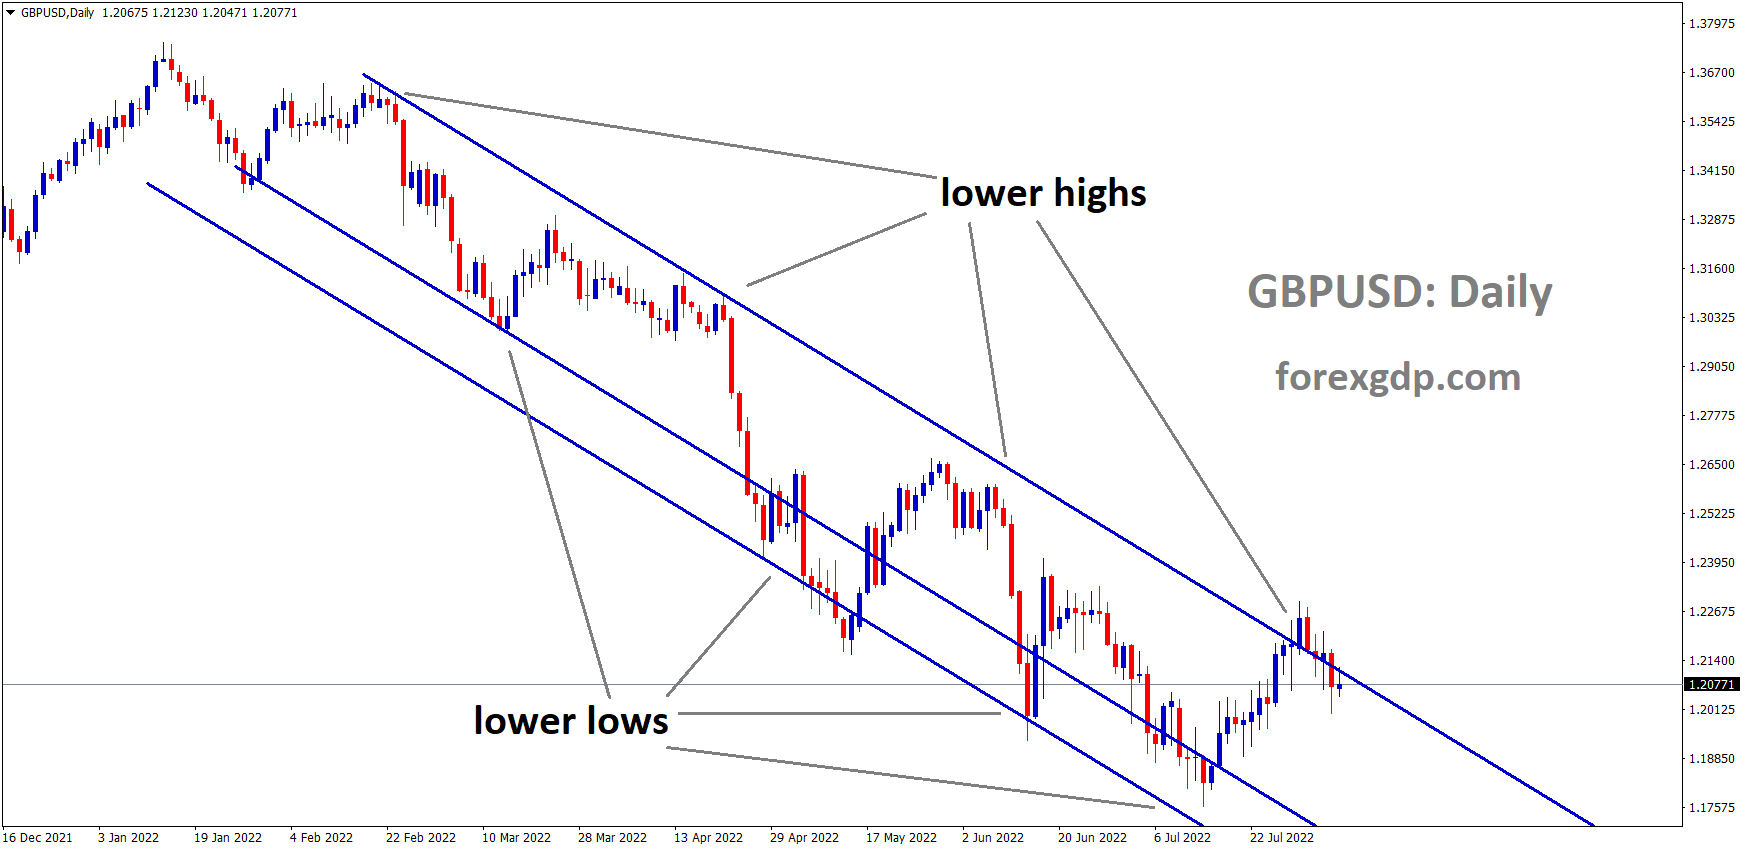 GBPUSD is moving in the Descending channel and the Market has fallen from the Lower high area of the channel